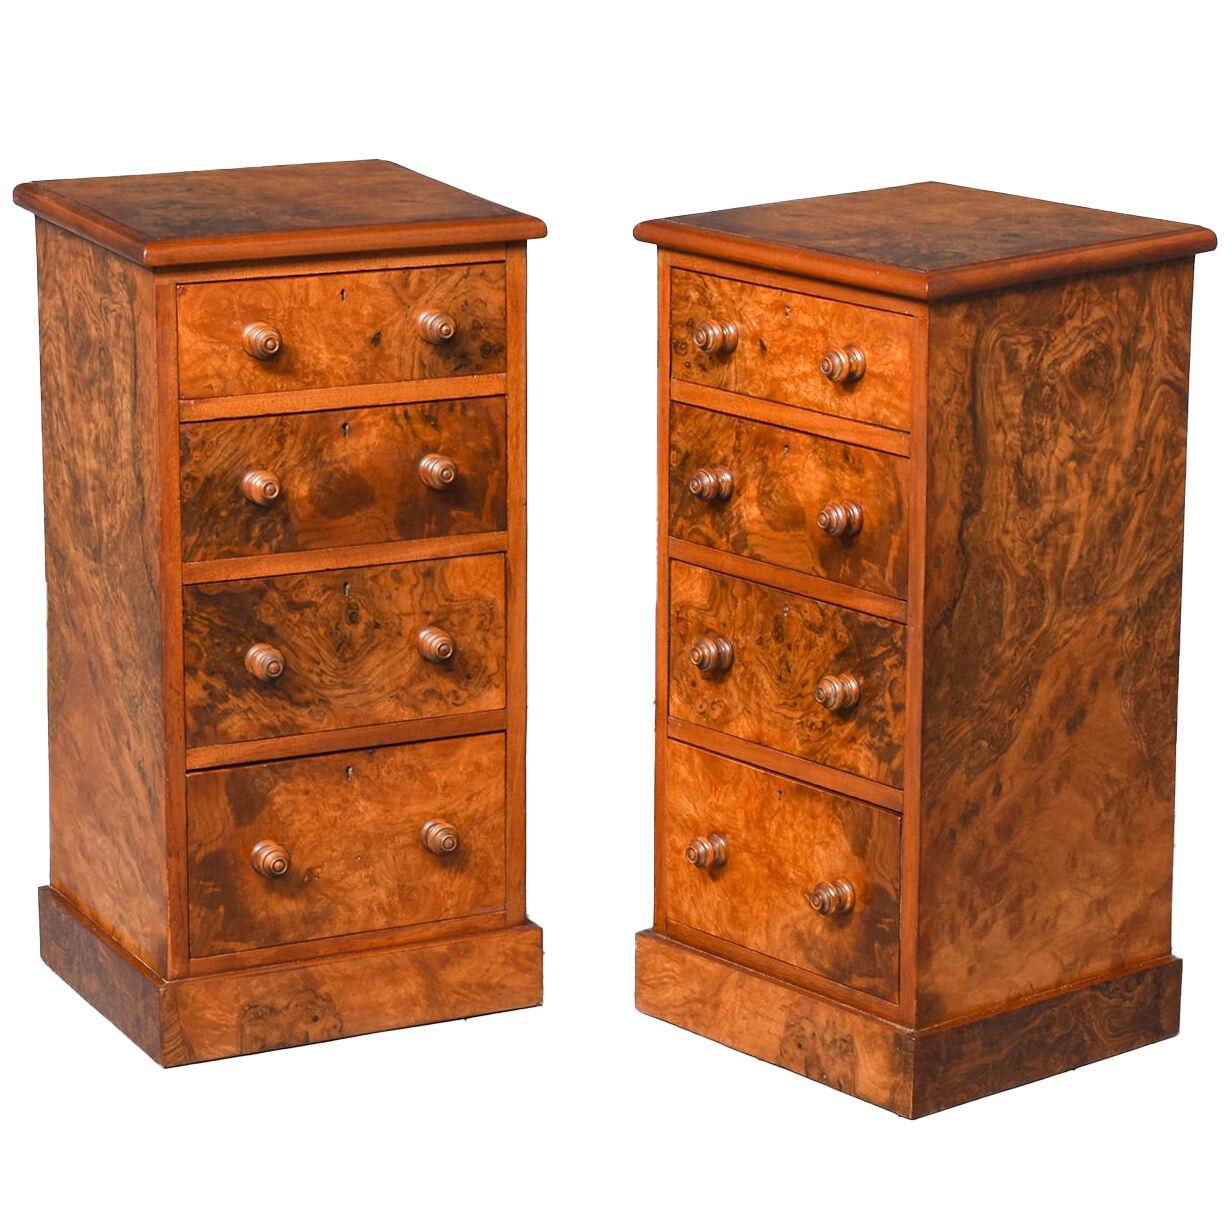 Pair Of Figured Walnut Victorian Bedside Lockers/Small Chest of Drawers